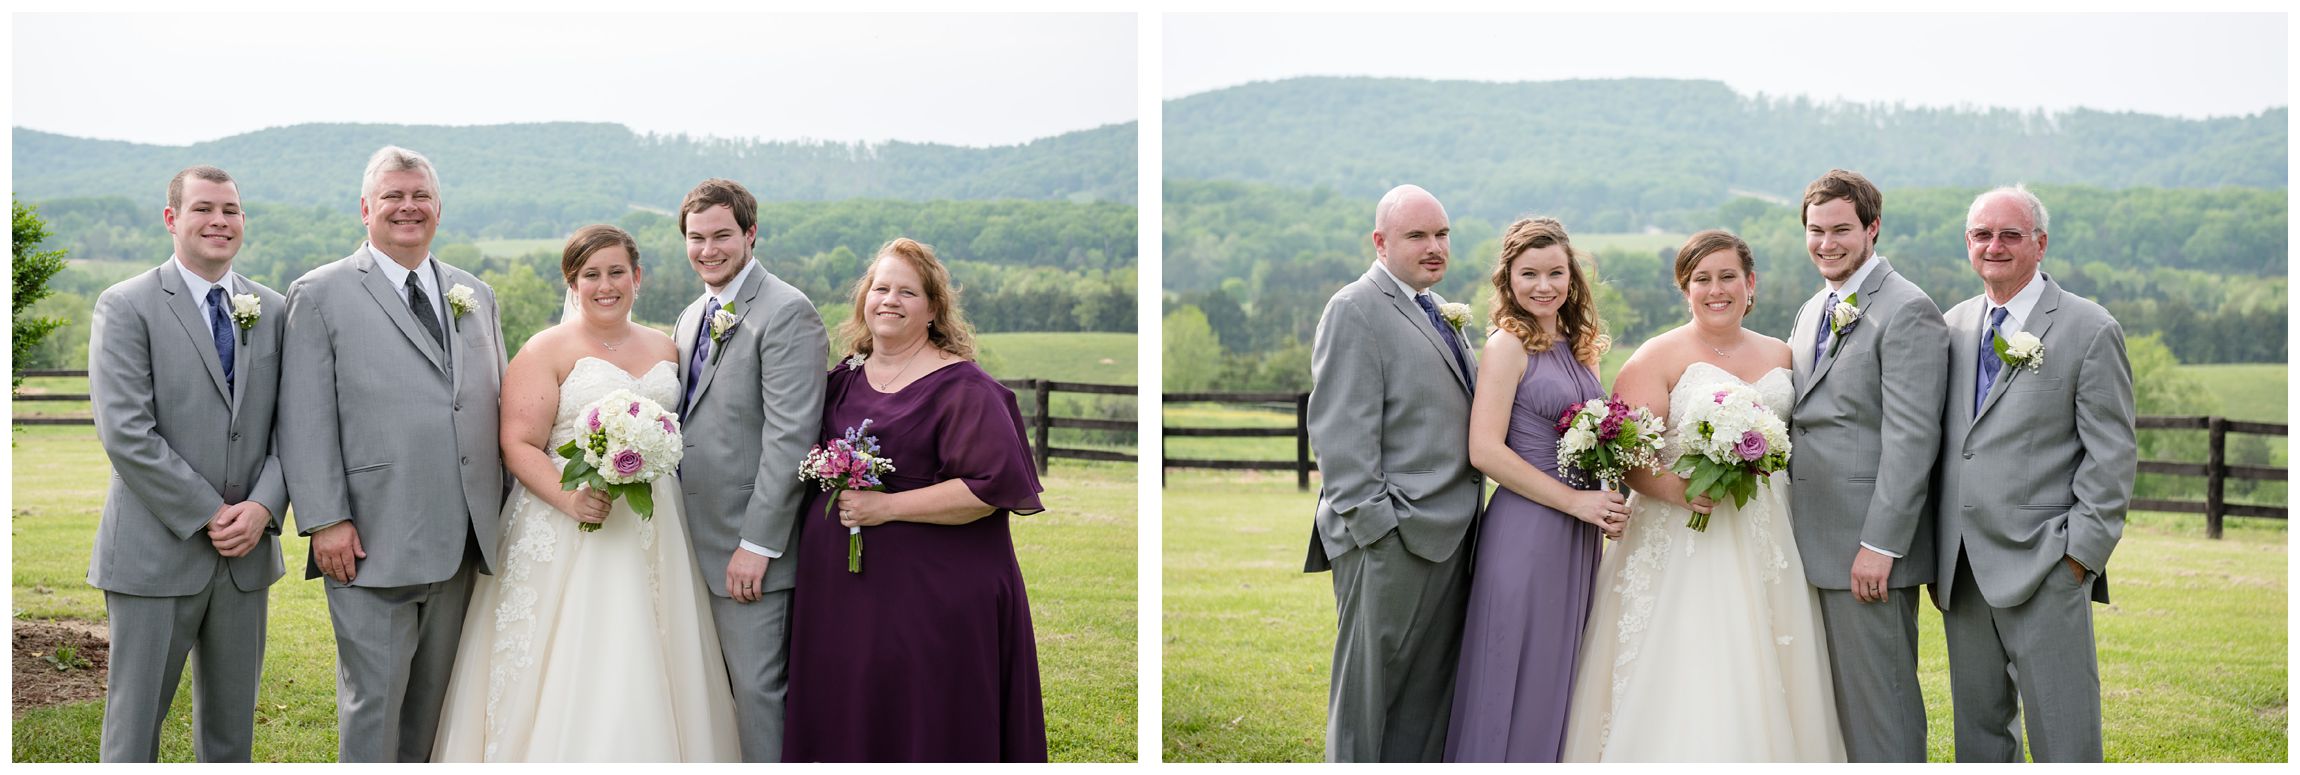 family portraits at rustic wedding at Wolftrap Farm